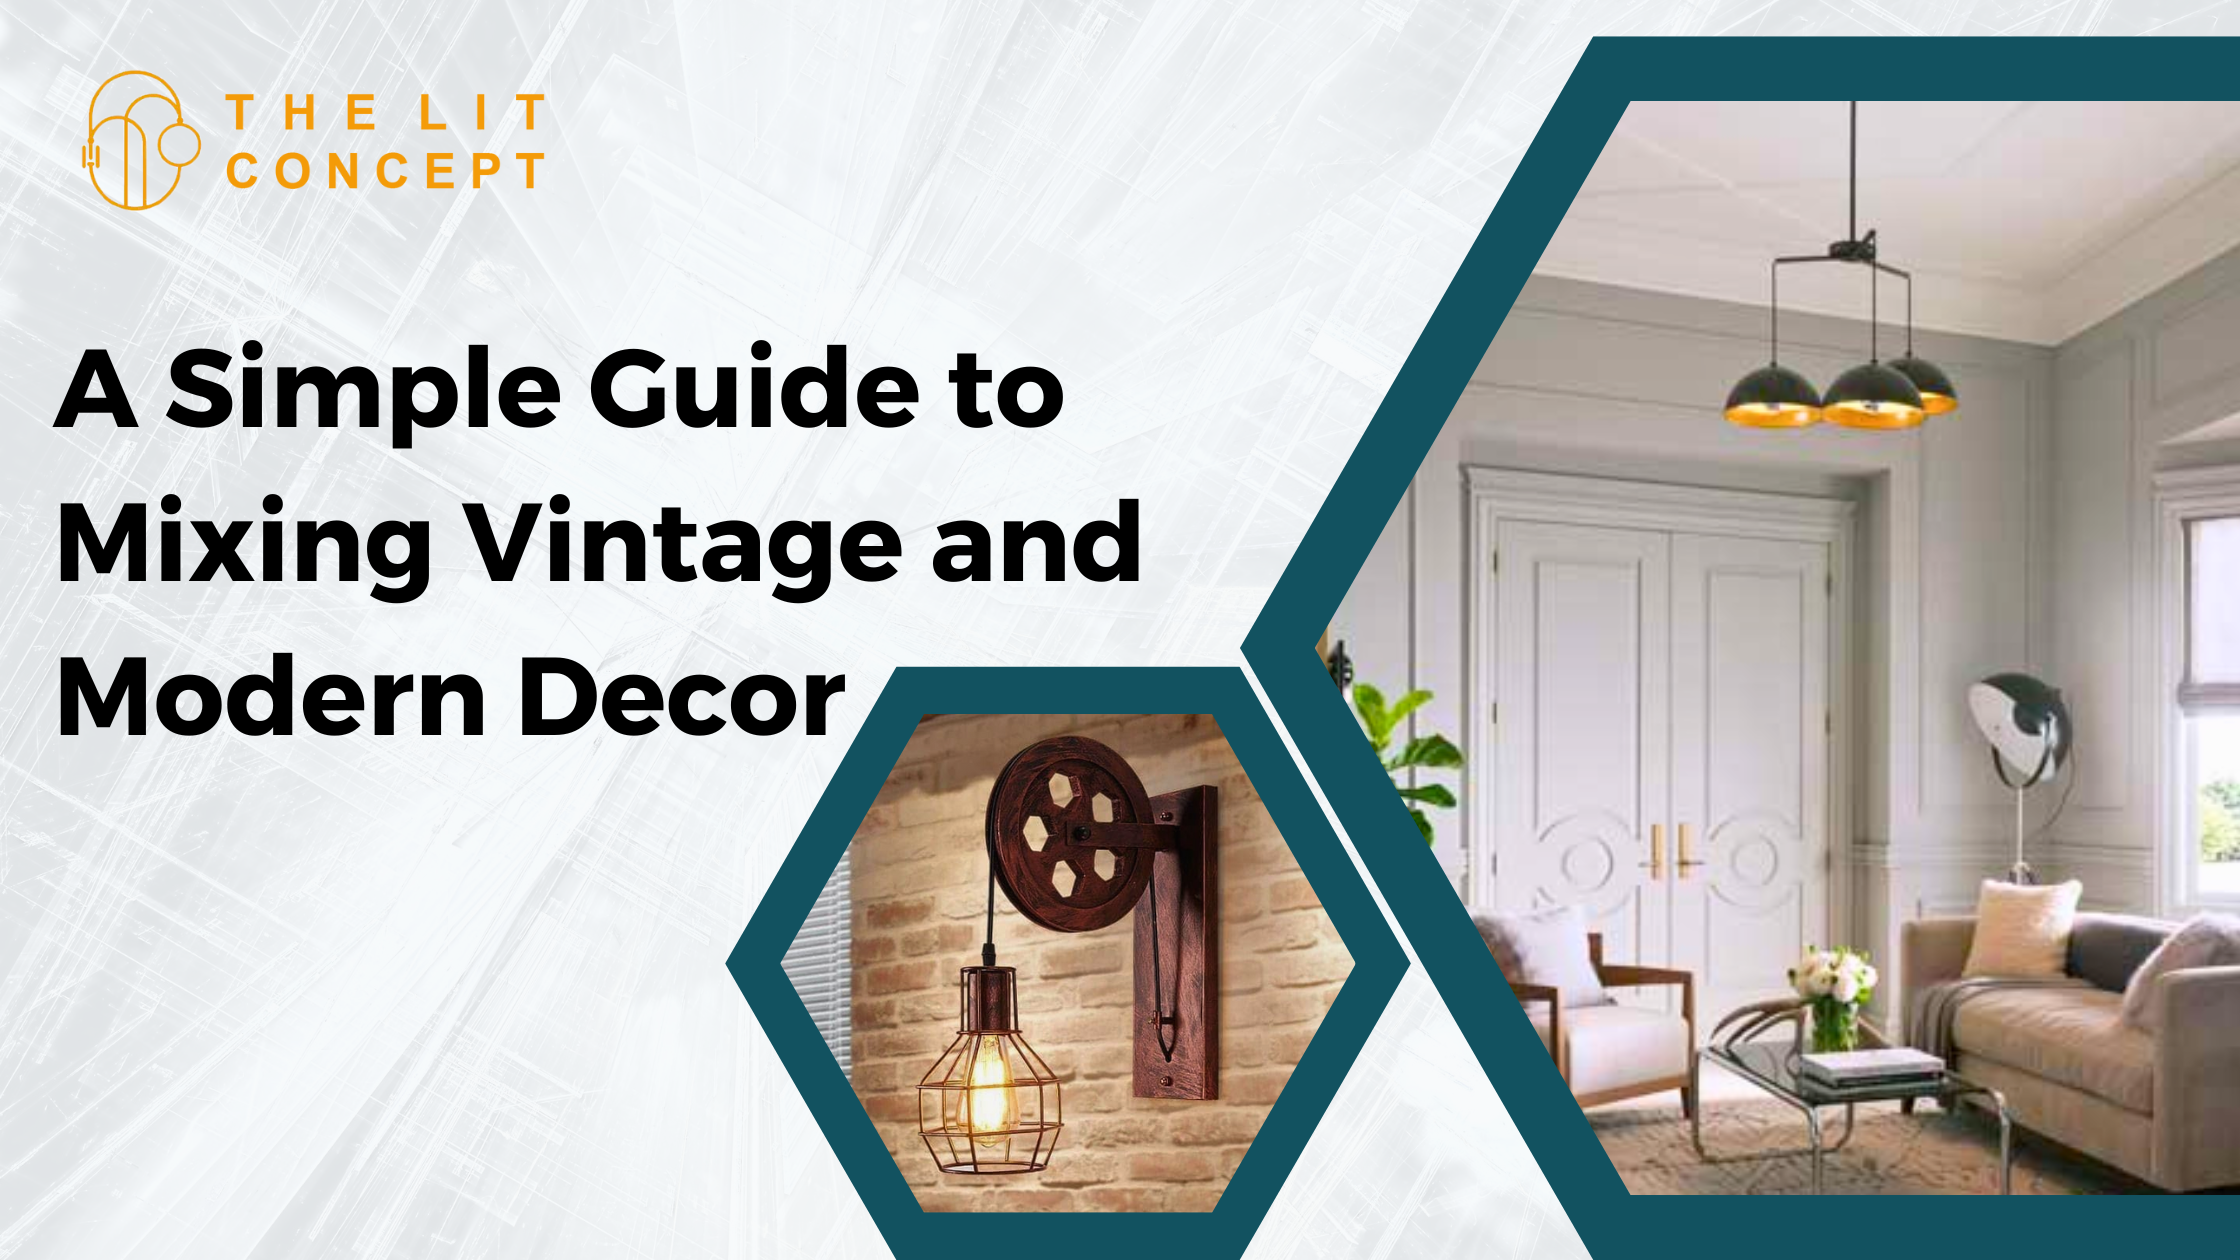 Guide to Mixing Vintage and Modern Decor